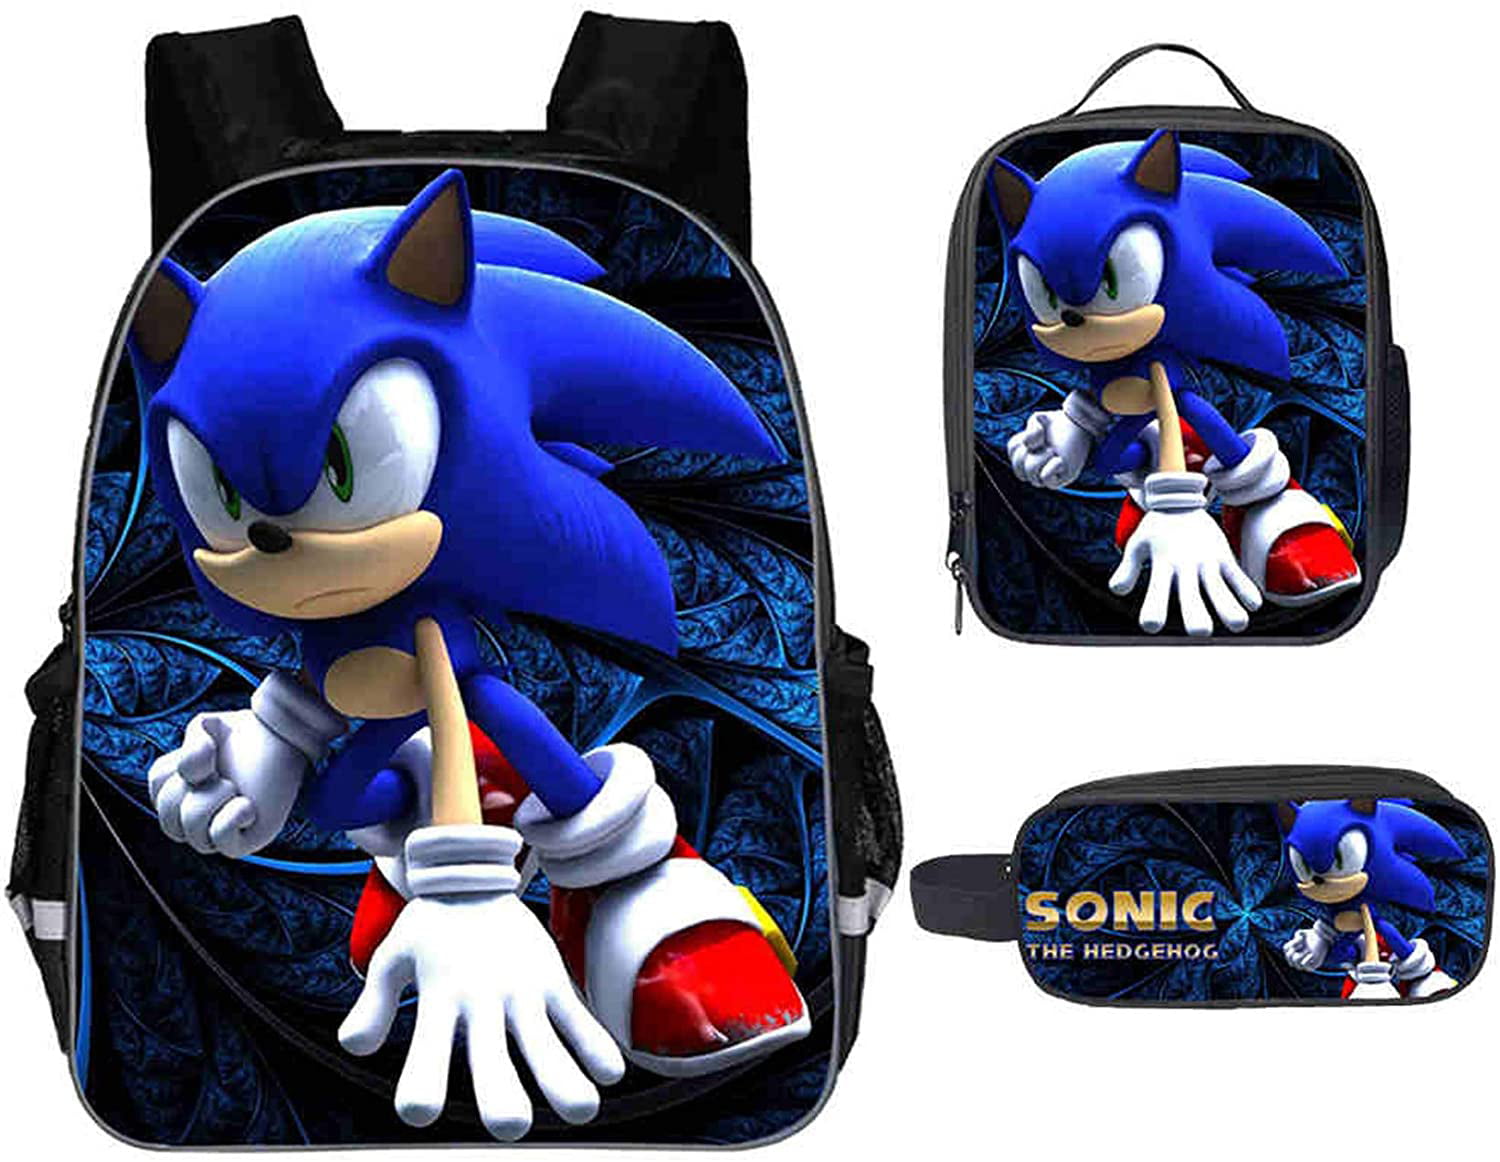 Kids Boys Sonic The Hedgehog School Book Bag,Canvas Backpack Pencil Box Set for Students Lunch Bag 